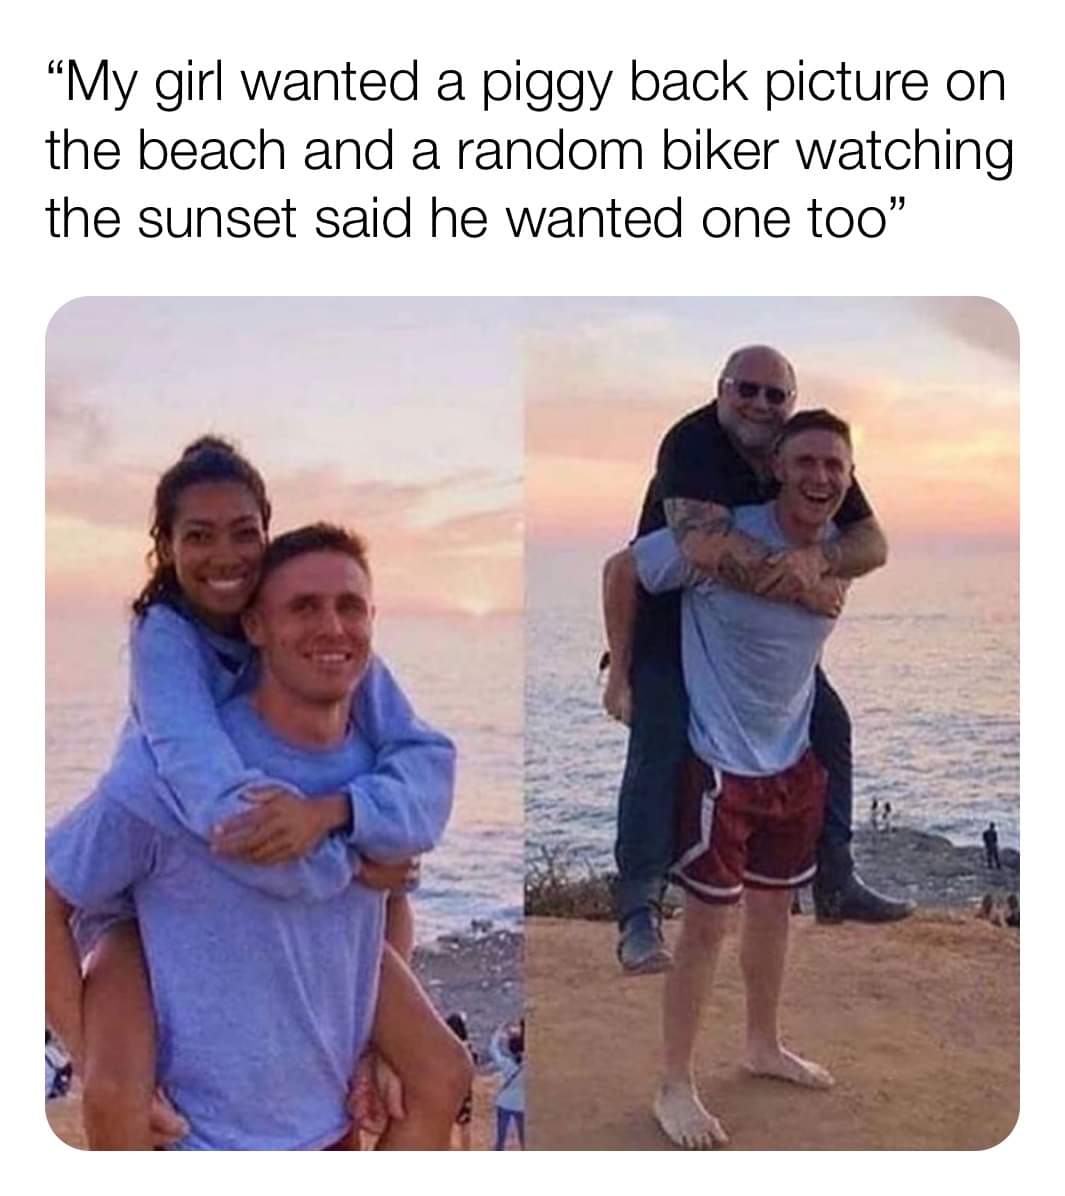 latest and greatest memes - My girl wanted a piggy back picture on the beach and a random biker watching the sunset said he wanted one too"